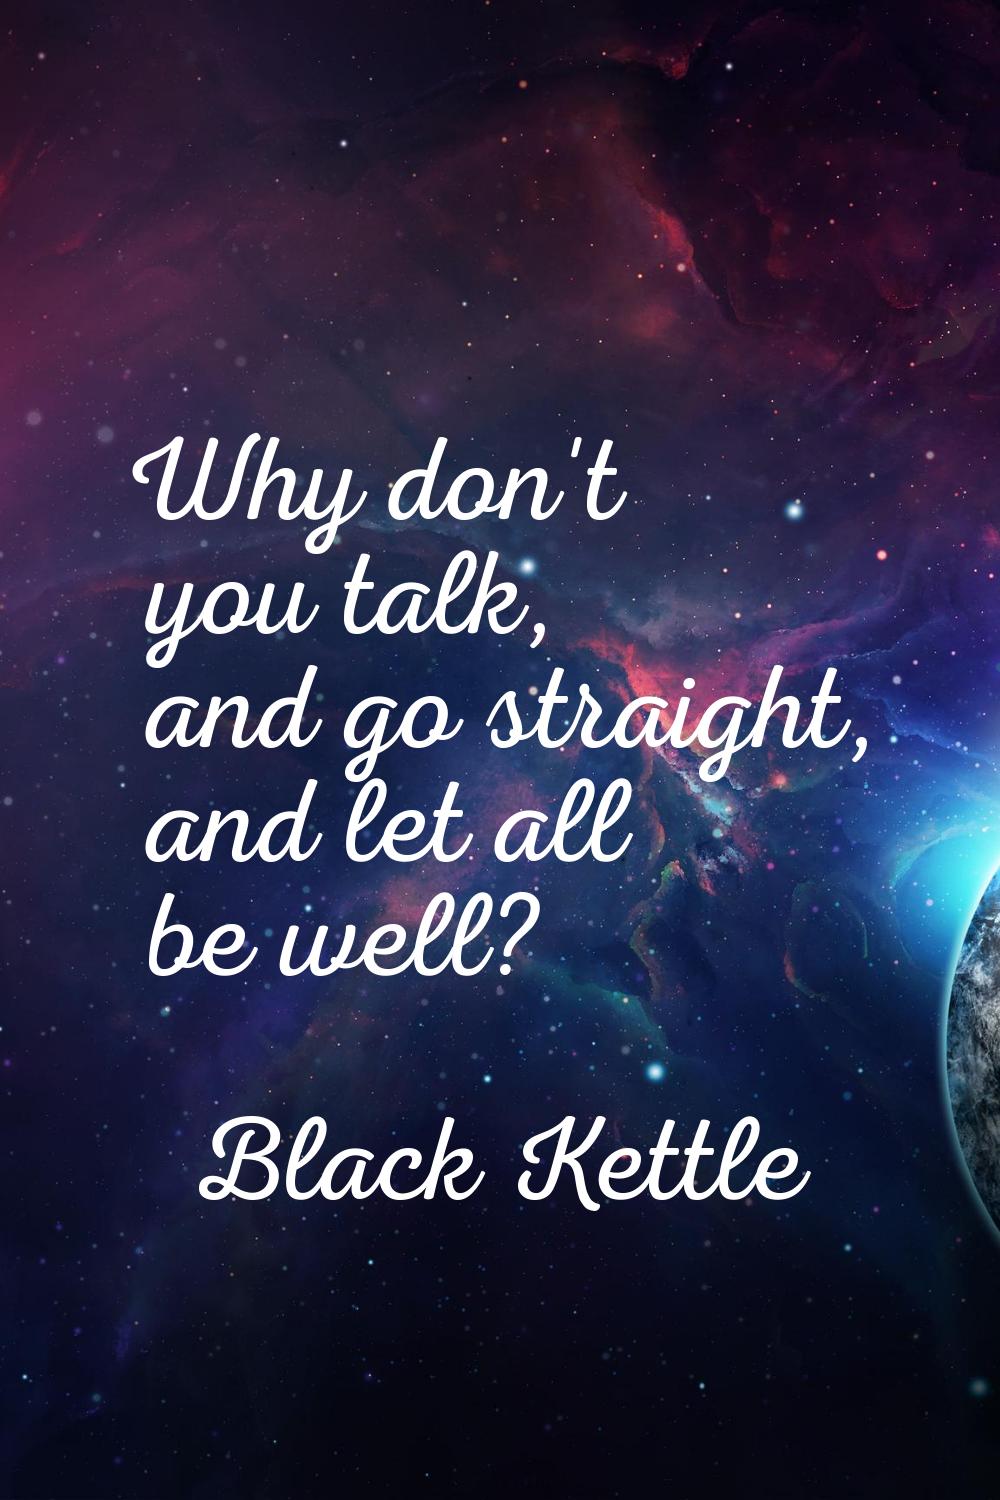 Why don't you talk, and go straight, and let all be well?